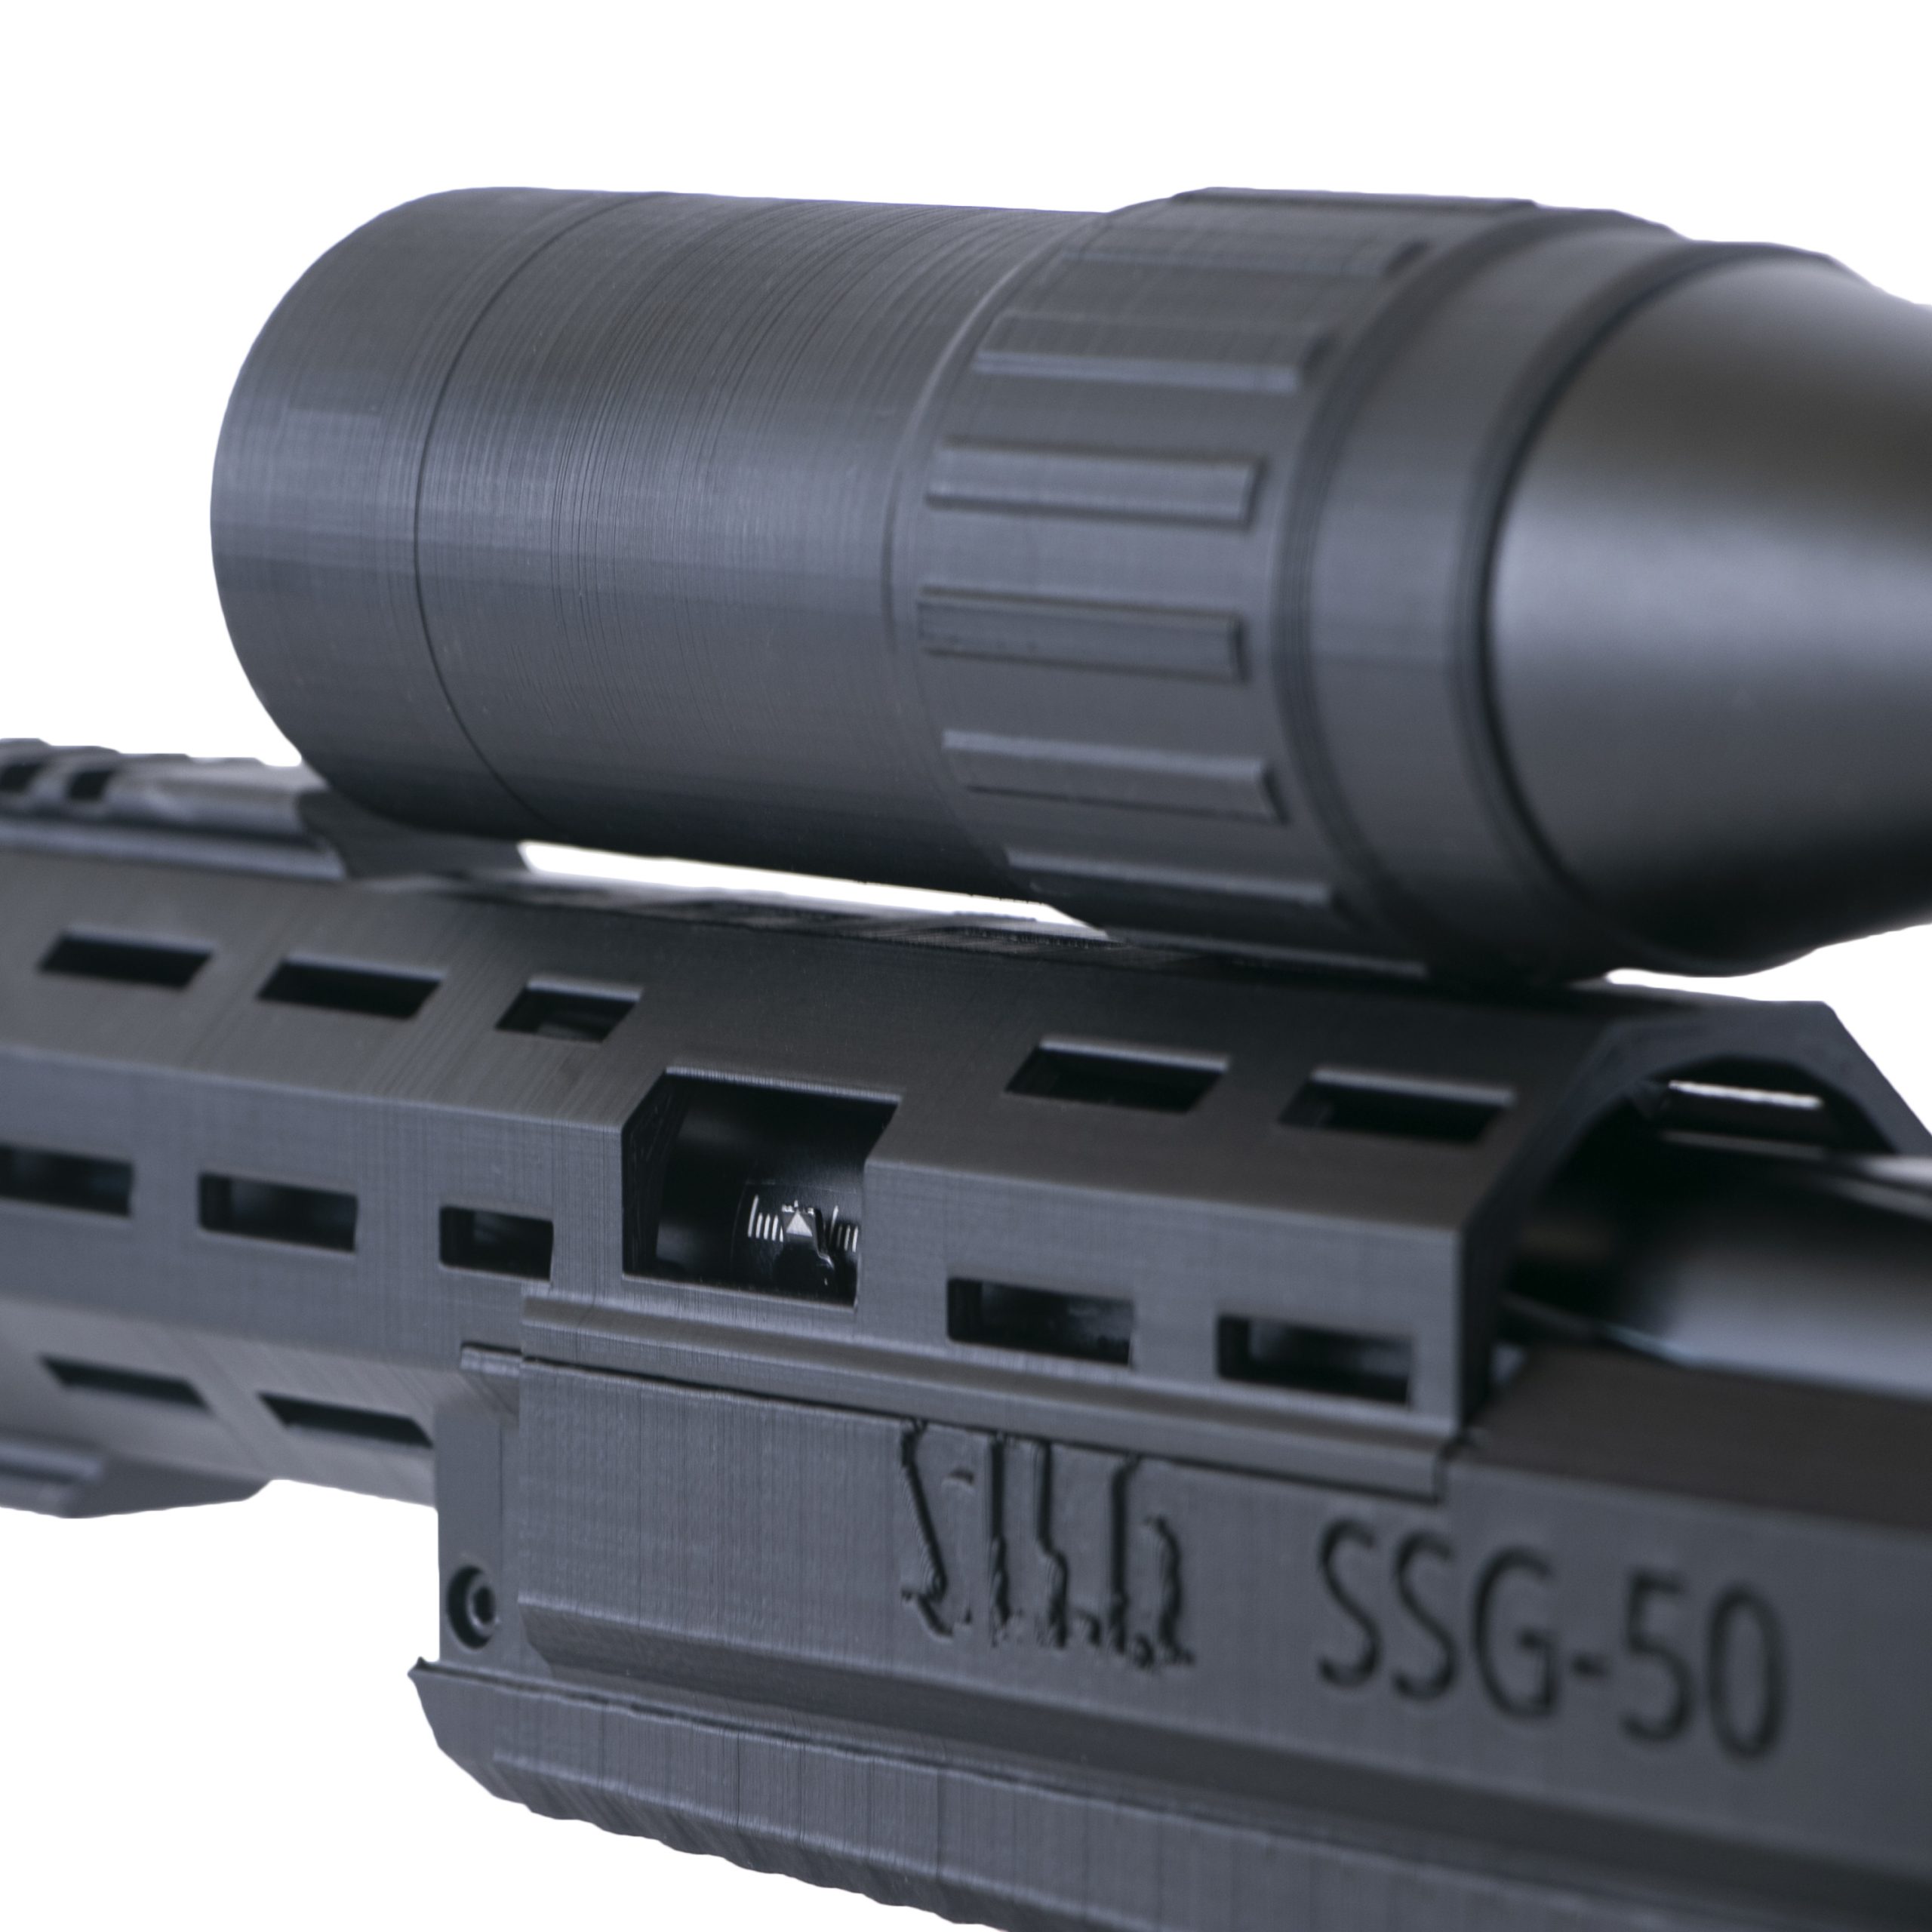 DVL-10 Stock for SSG10 - Silo Airsoft